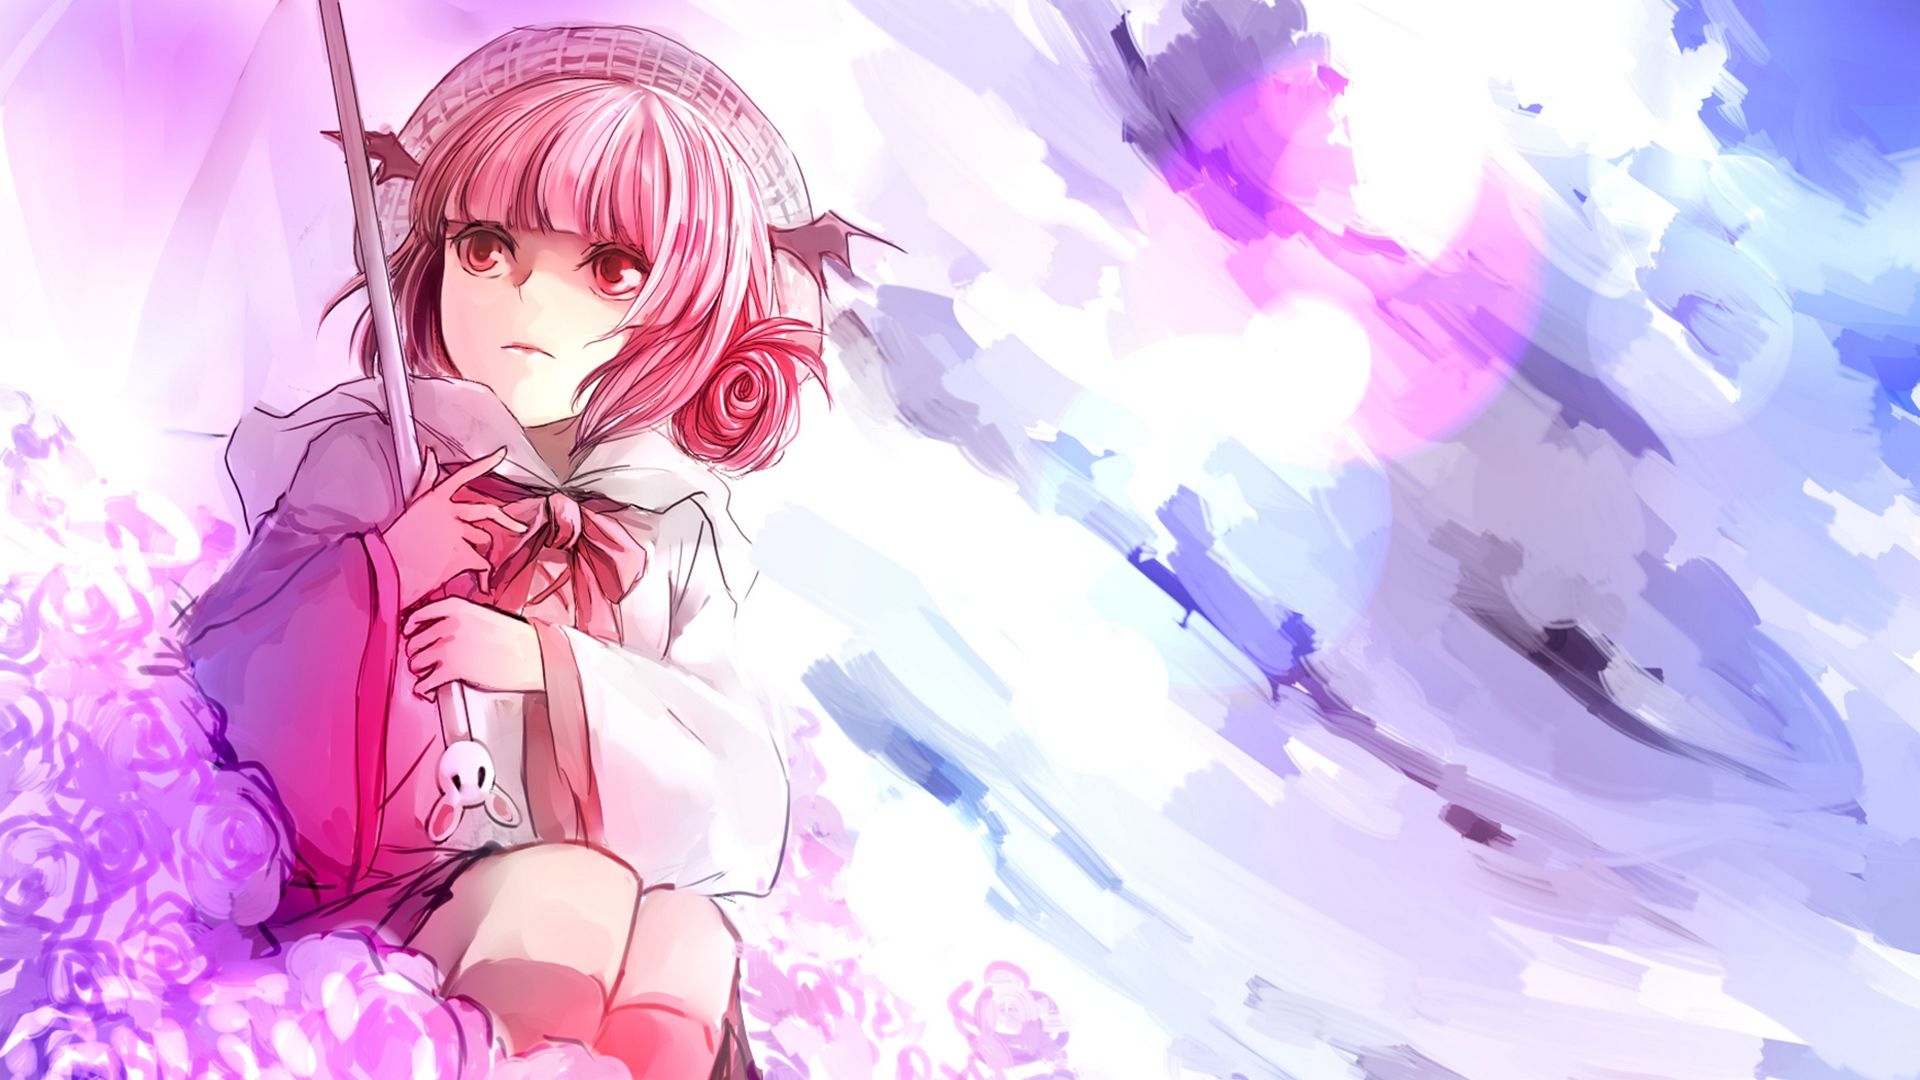 1920x1080 Pink Anime Wallpapers - Wallpaper Cave